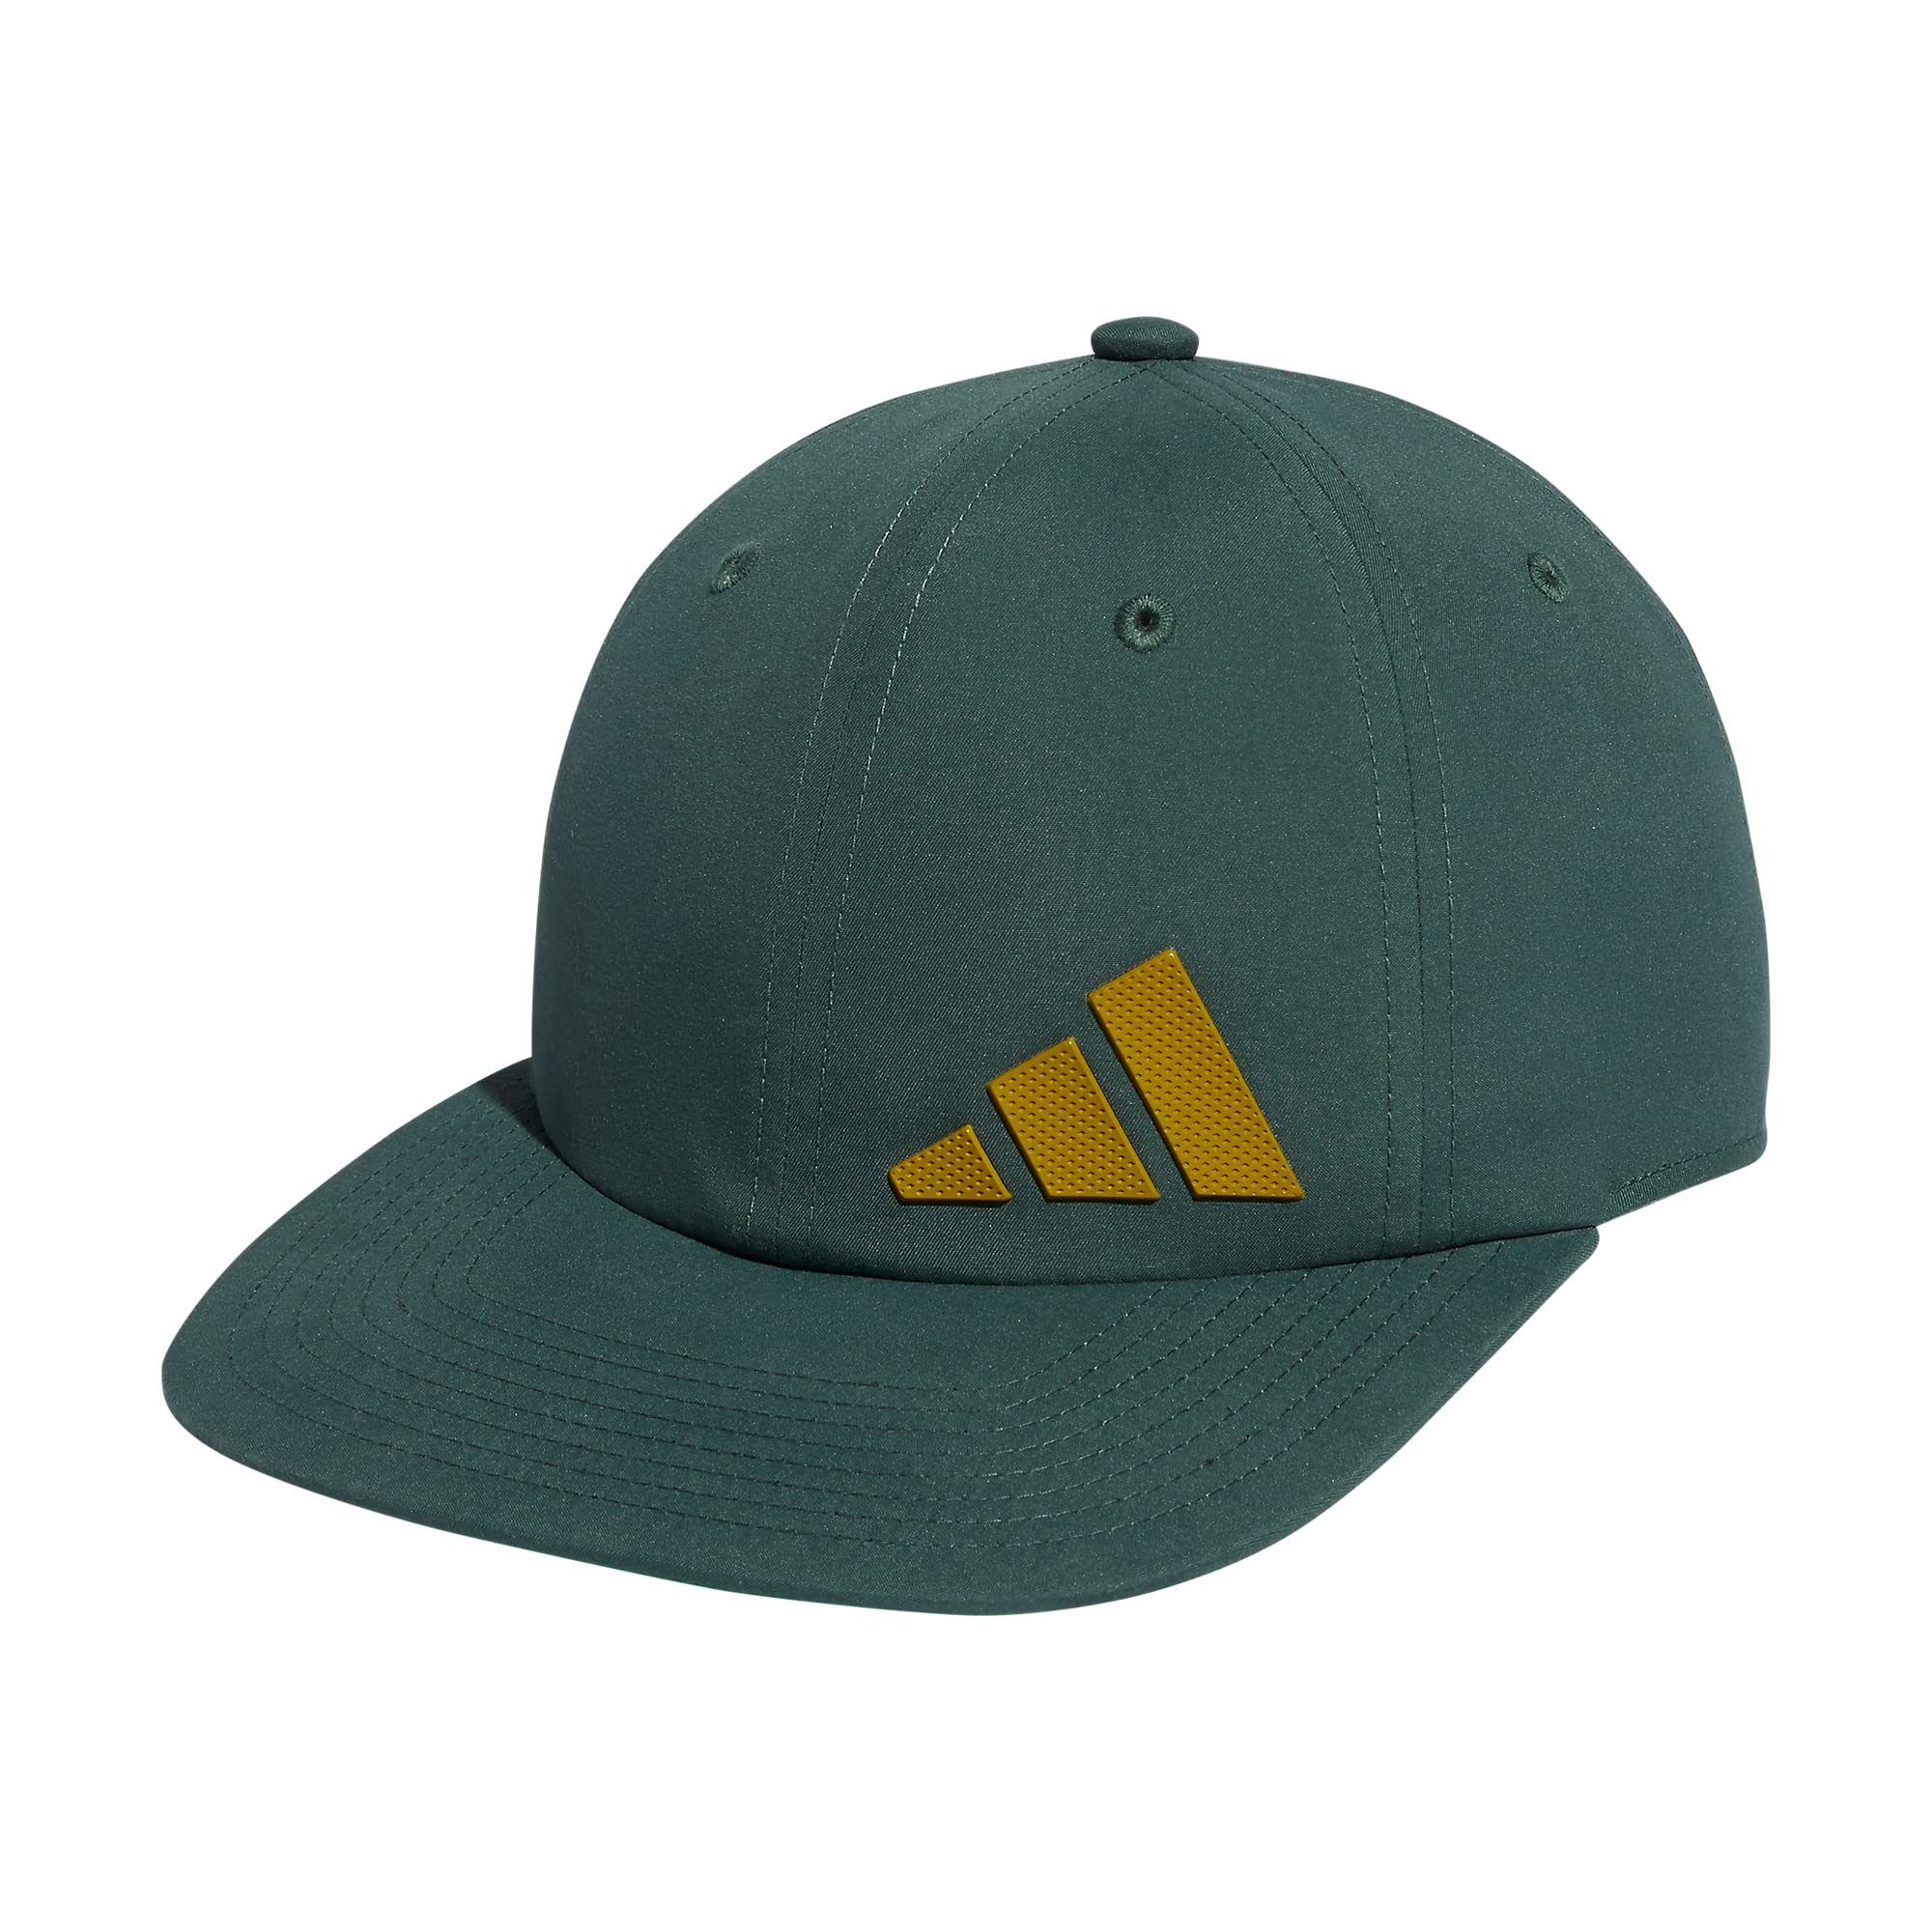 adidas Men's Offset 3-Bar Snapback Relaxed Fit Adjustable Hat (Green Oxide/Pulse Olive Green) $8.45 + Free Shipping w/ Prime or on $25+